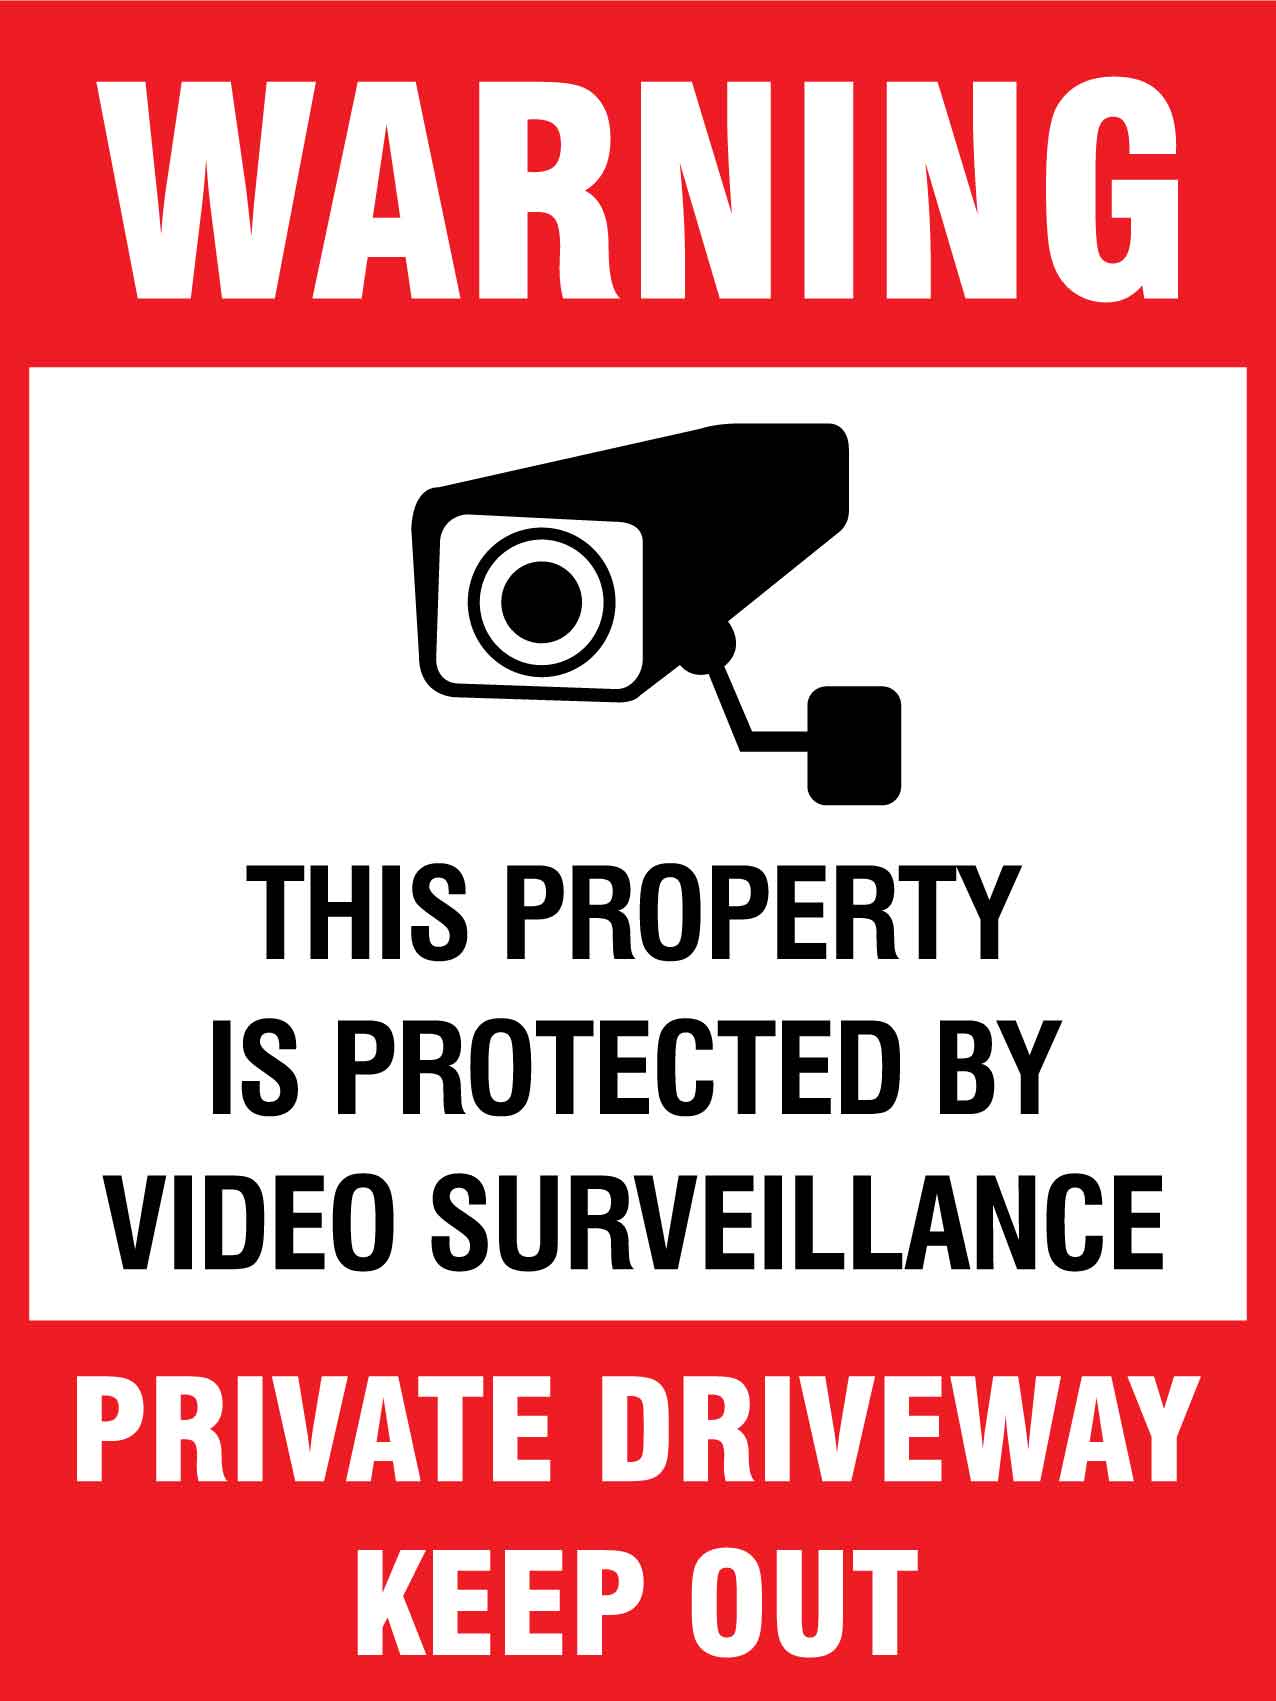 Warning This Property is Protected by Video Surveillance Private Driveway Keep Out Sign